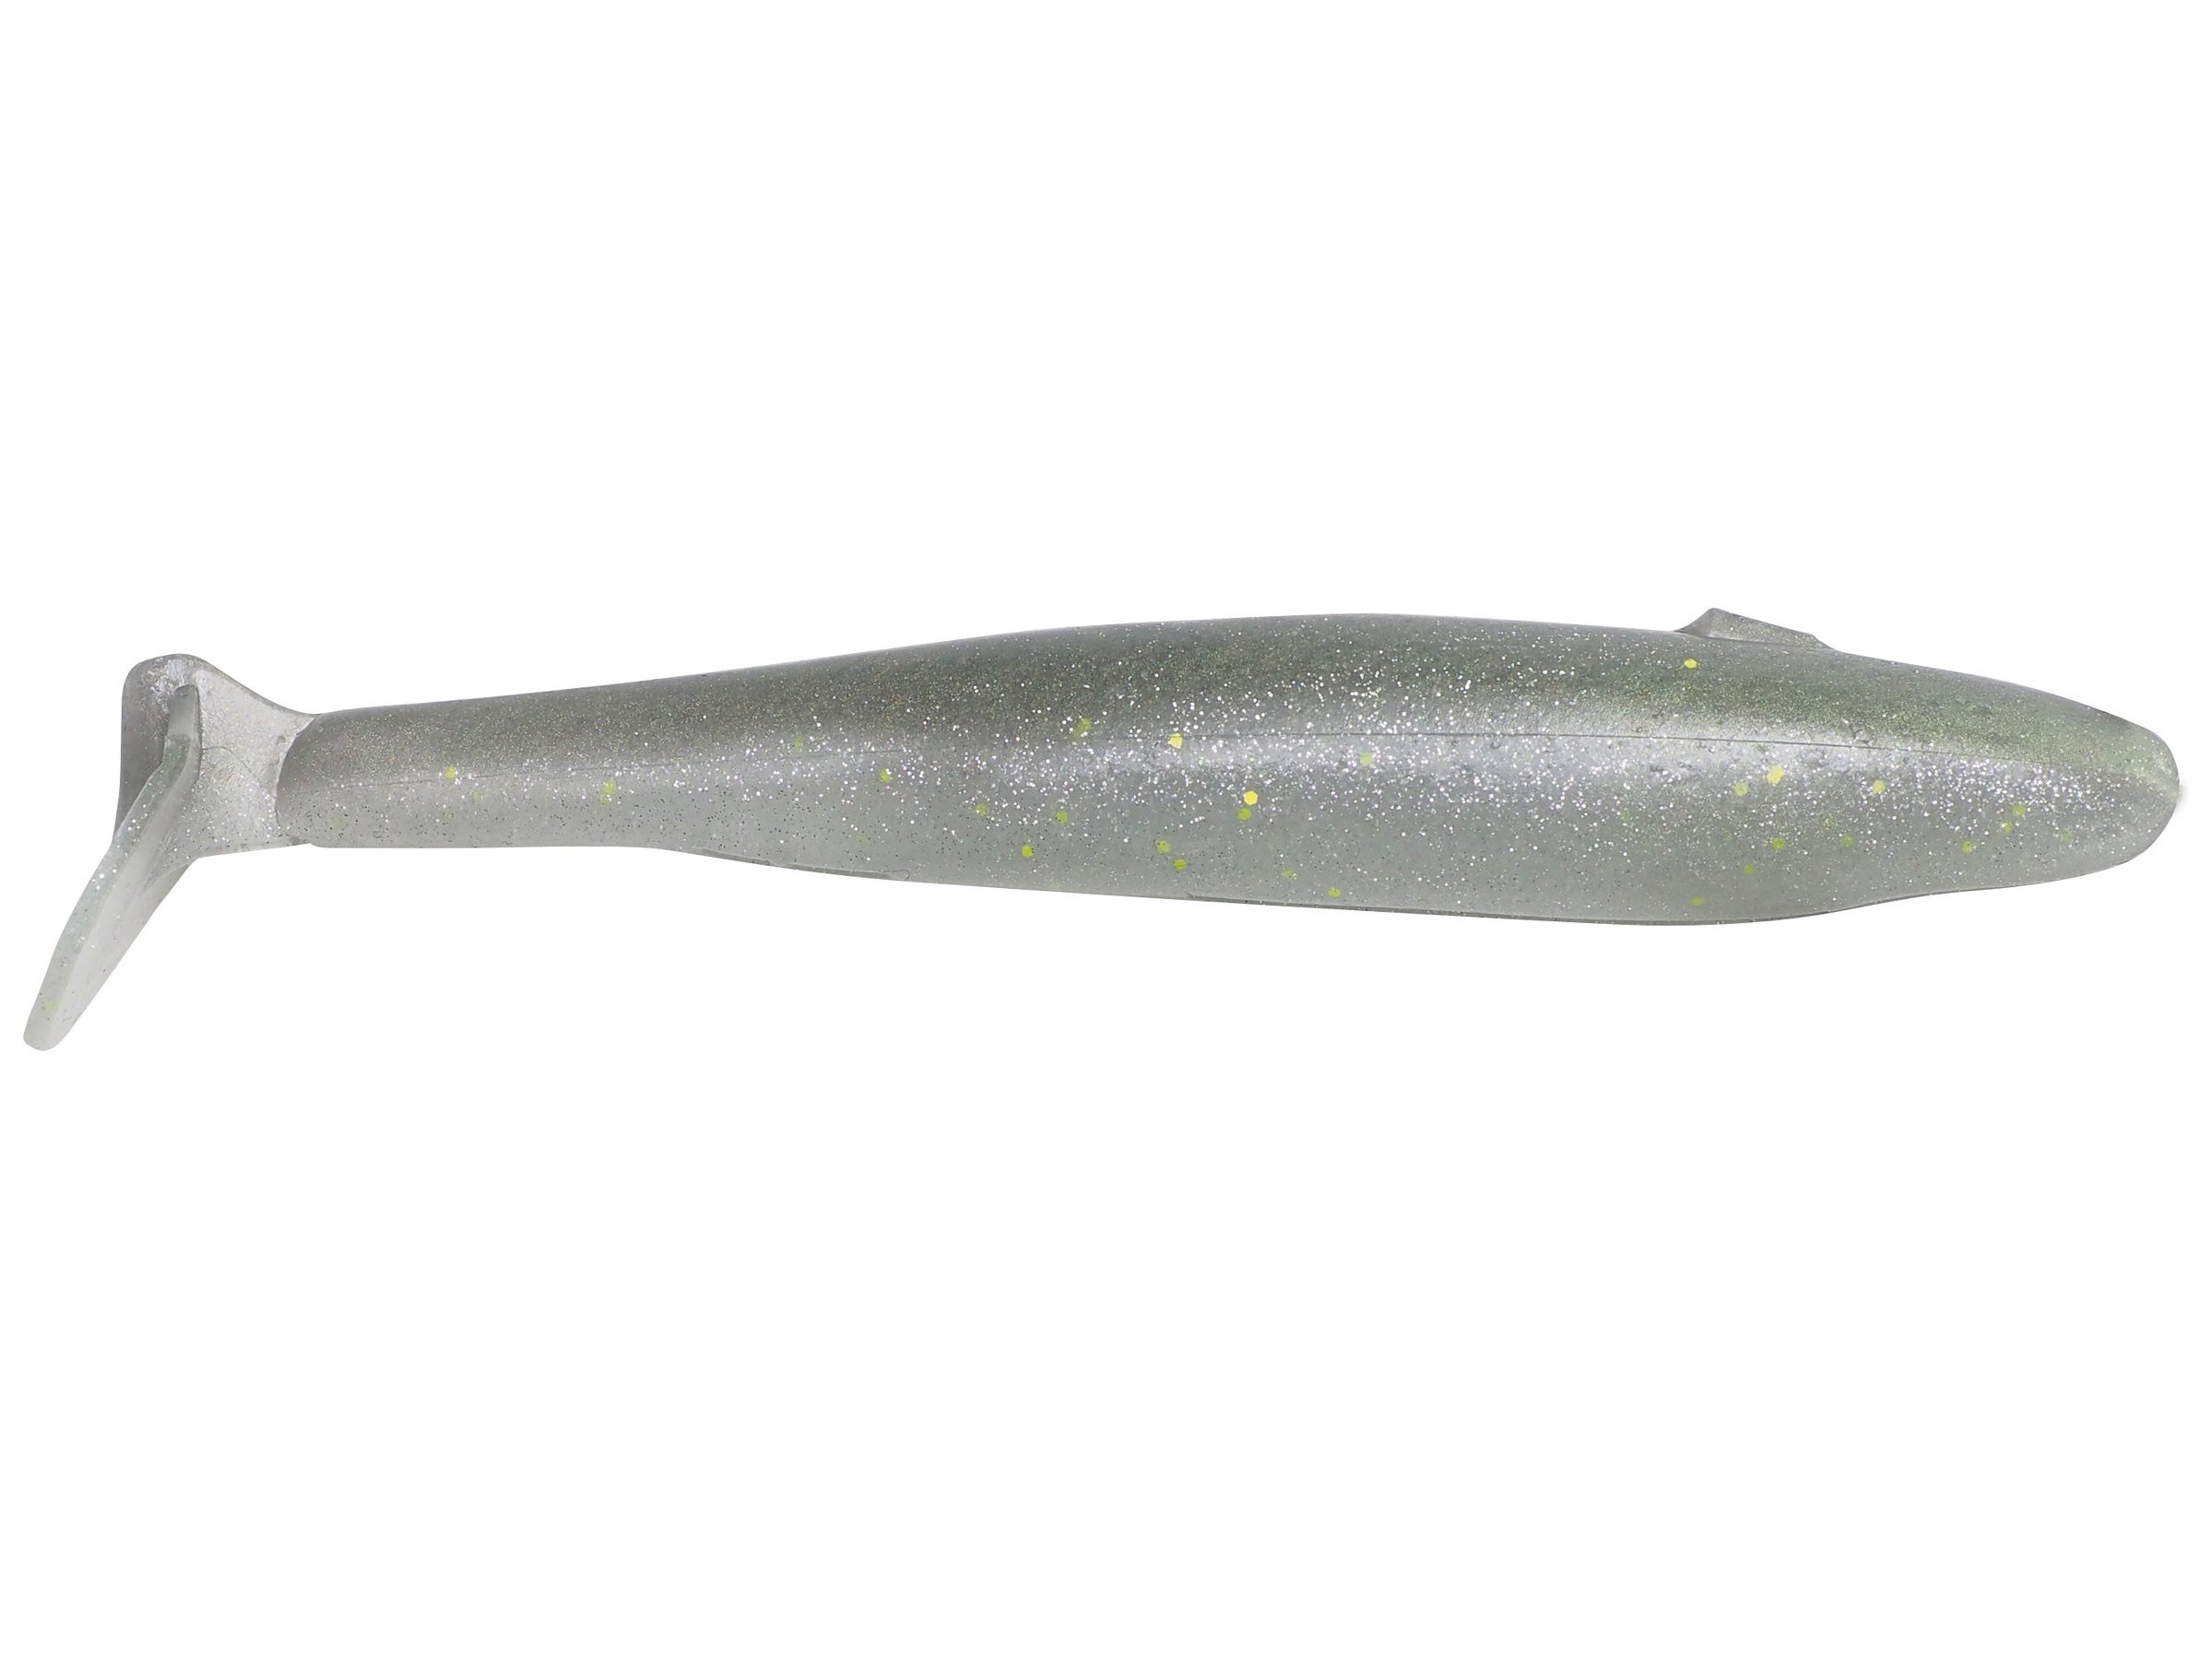 Details about   Gan Craft Soft Lure Bariki Shad 5.8 Inches 777 6818 